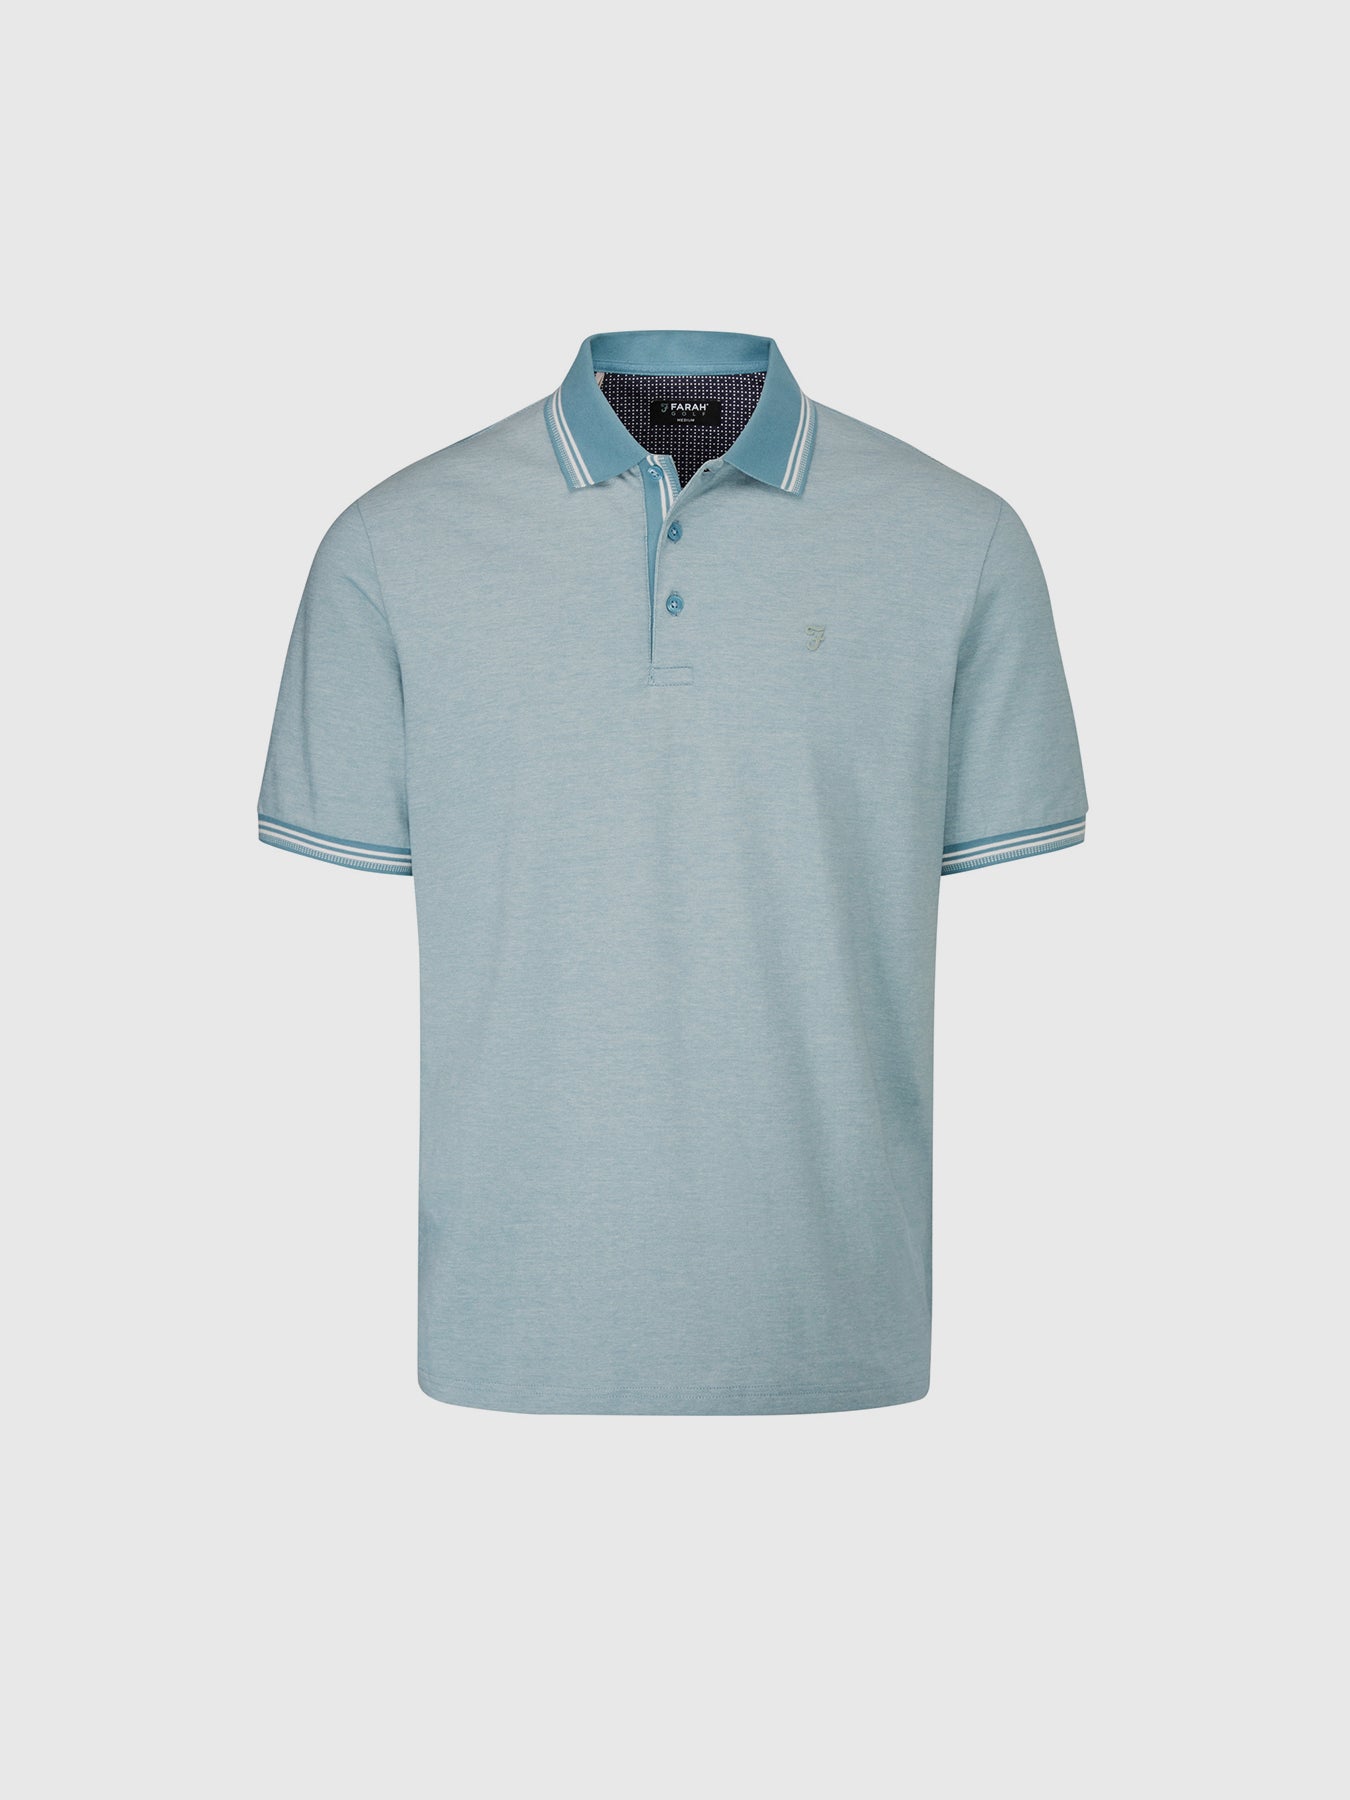 View Morrill Golf Polo Shirt In Teal Hue information